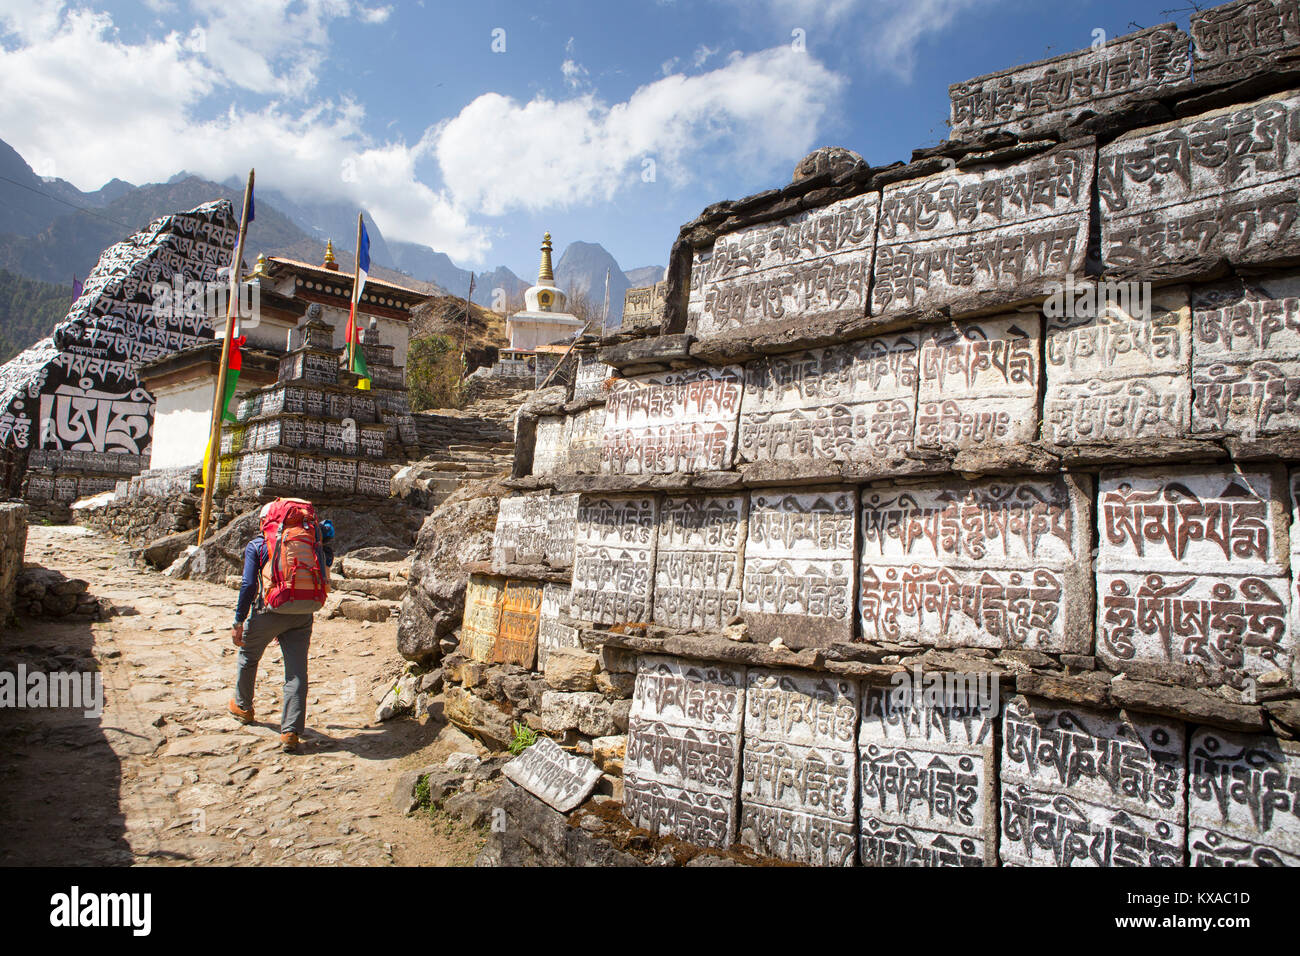 A trekker is walking past a big wall of Mani stones, with Buddhist prayer inscriptions. Stock Photo